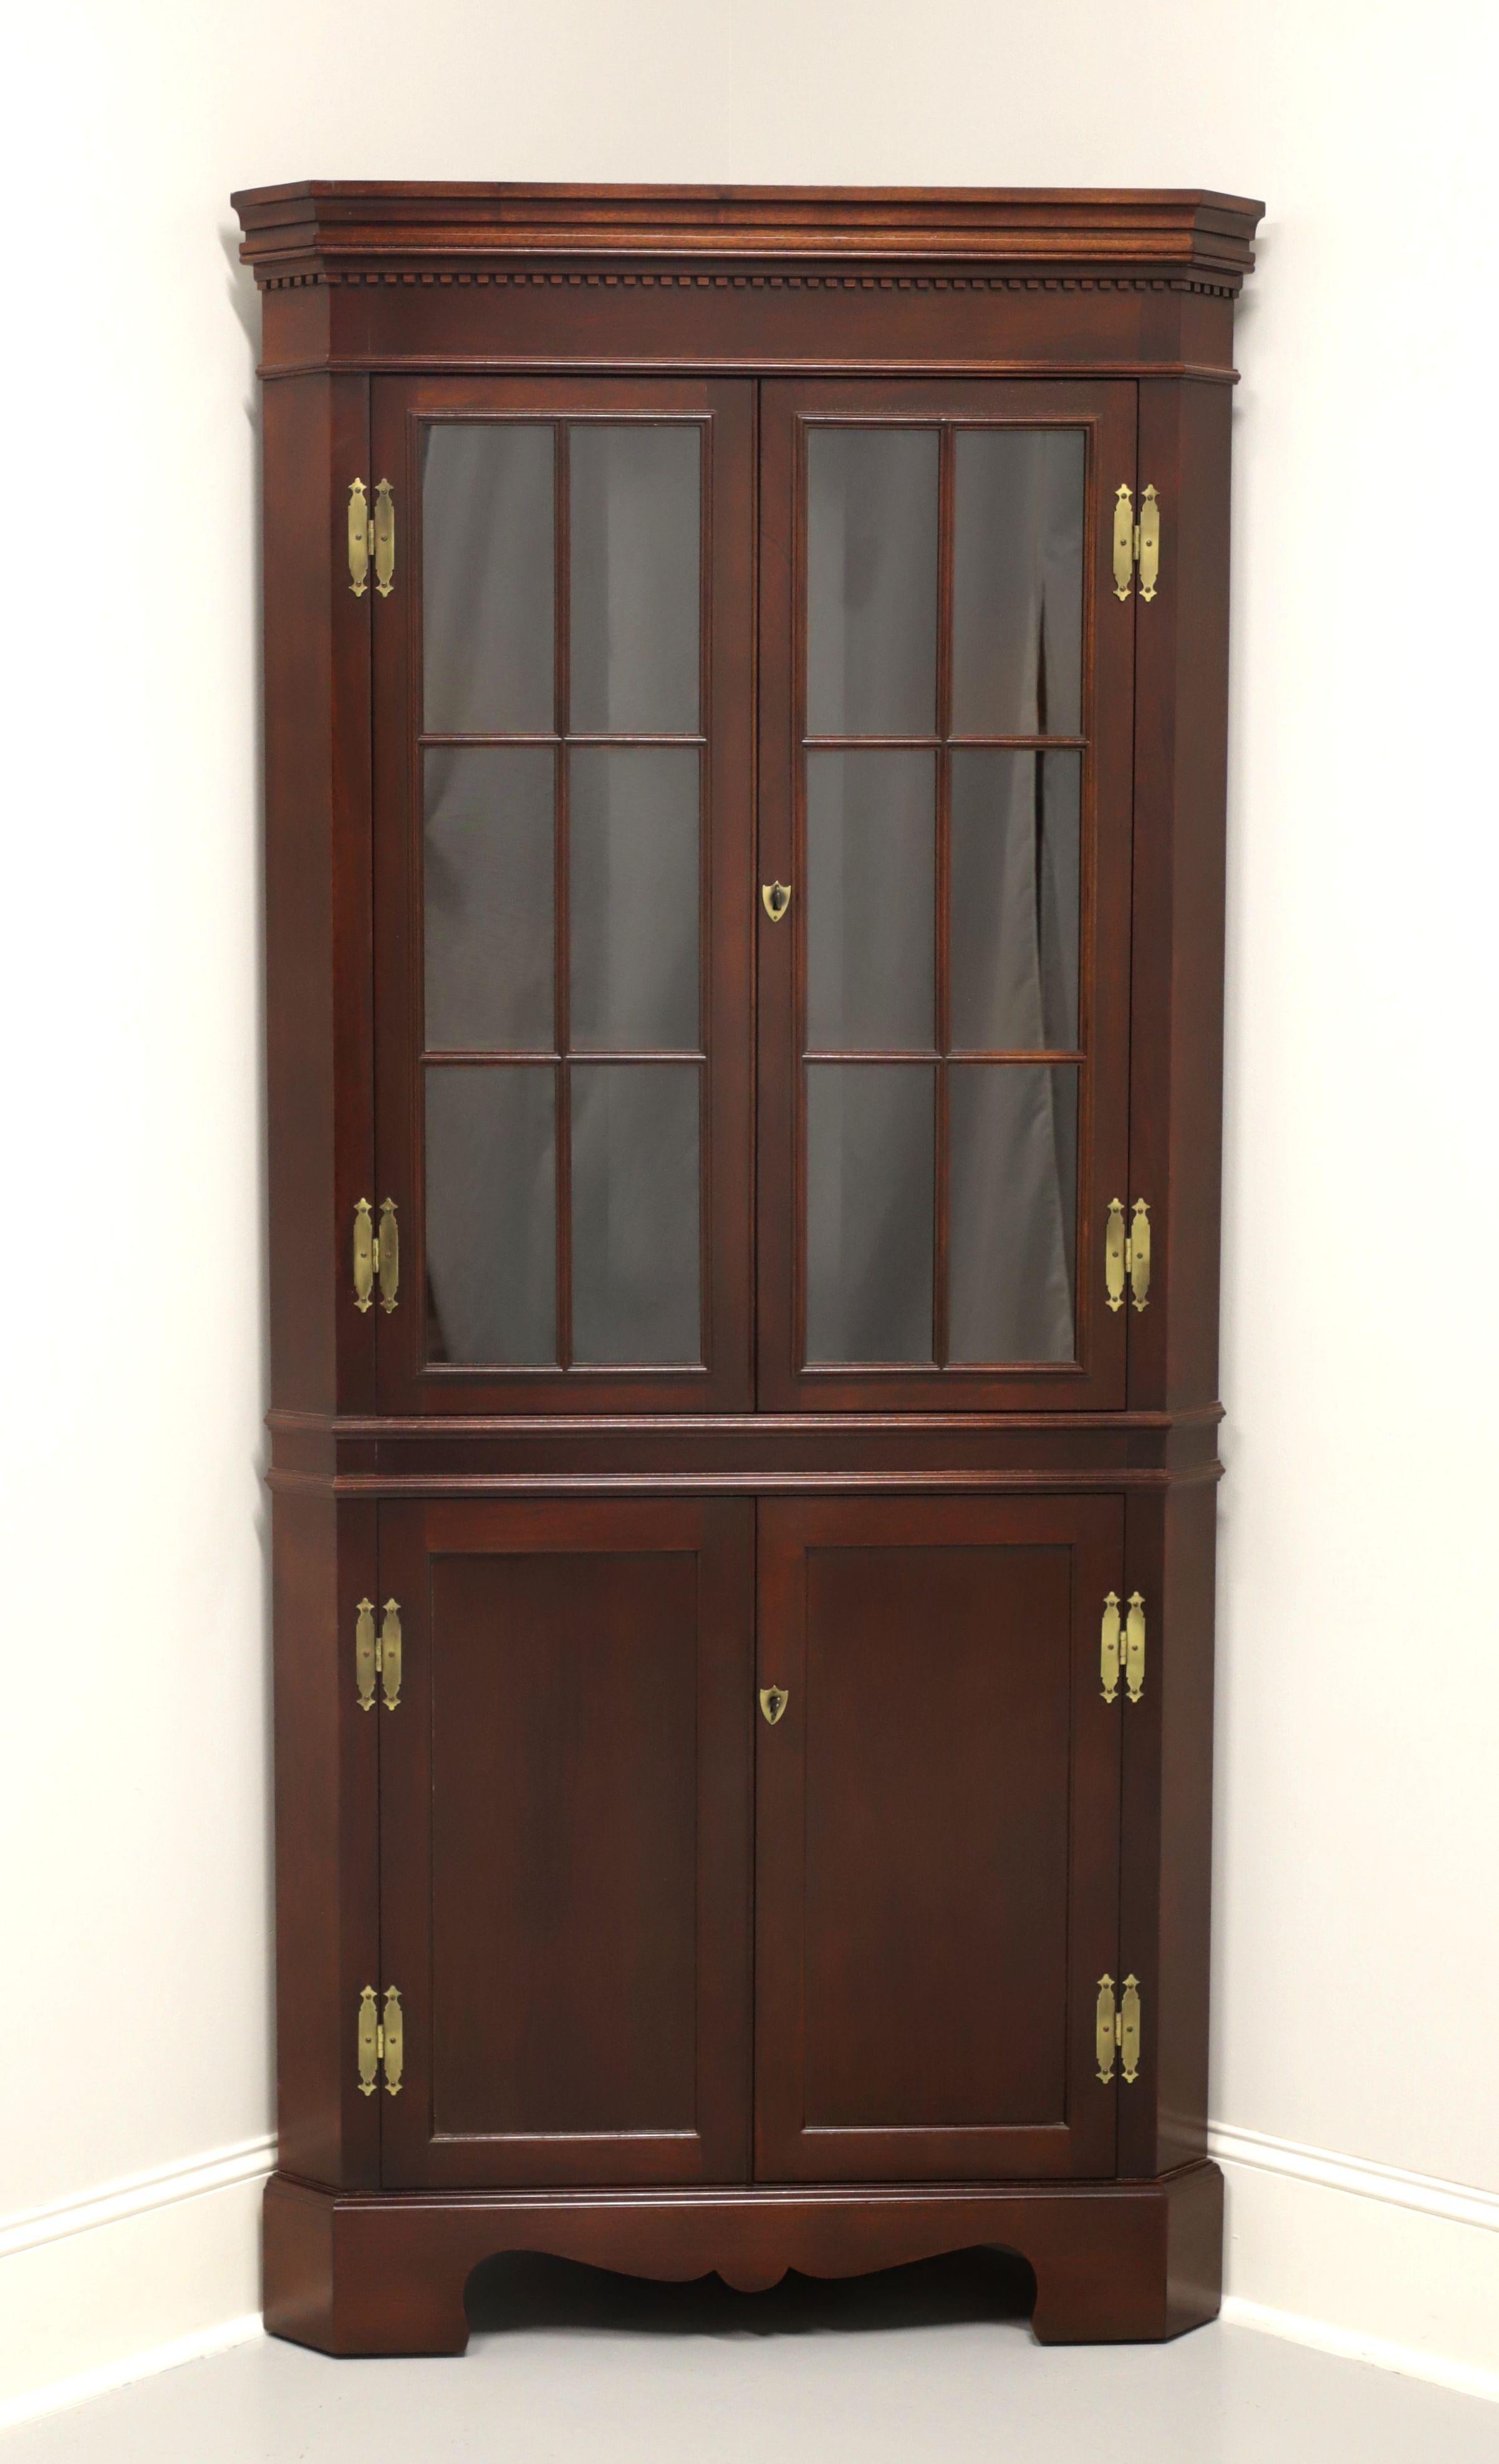 A Chippendale style corner cupboard by high-quality furniture maker Craftique. Solid mahogany with their Old Wood finish, crown & dentil molding to top, carved apron, and bracket feet. Upper cabinet features two fixed plate-grooved wooden shelves